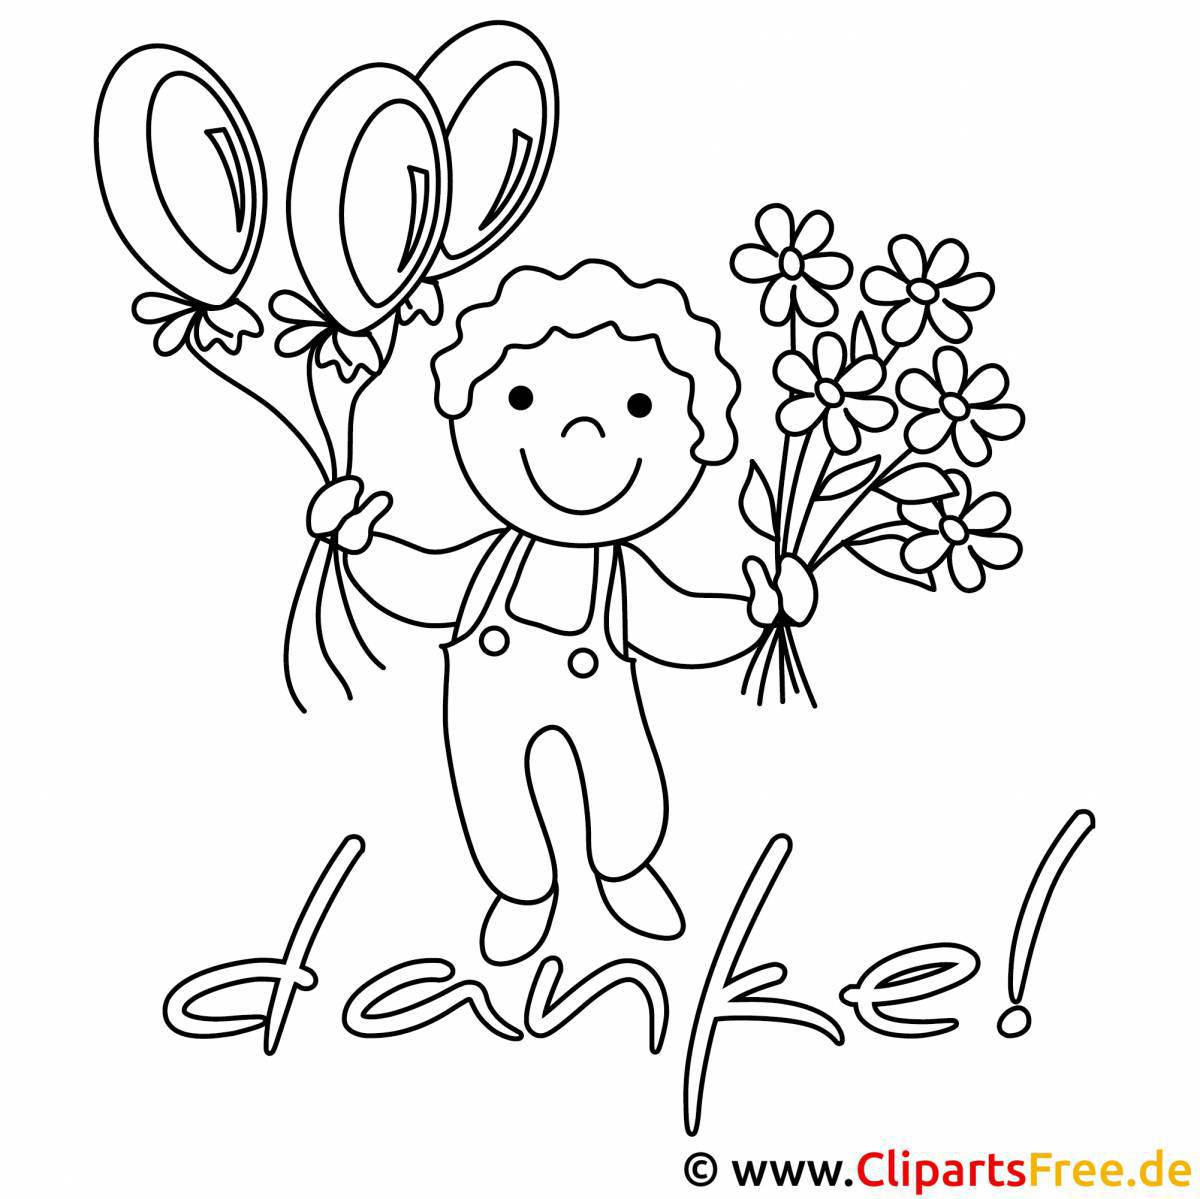 Happy thank you coloring page